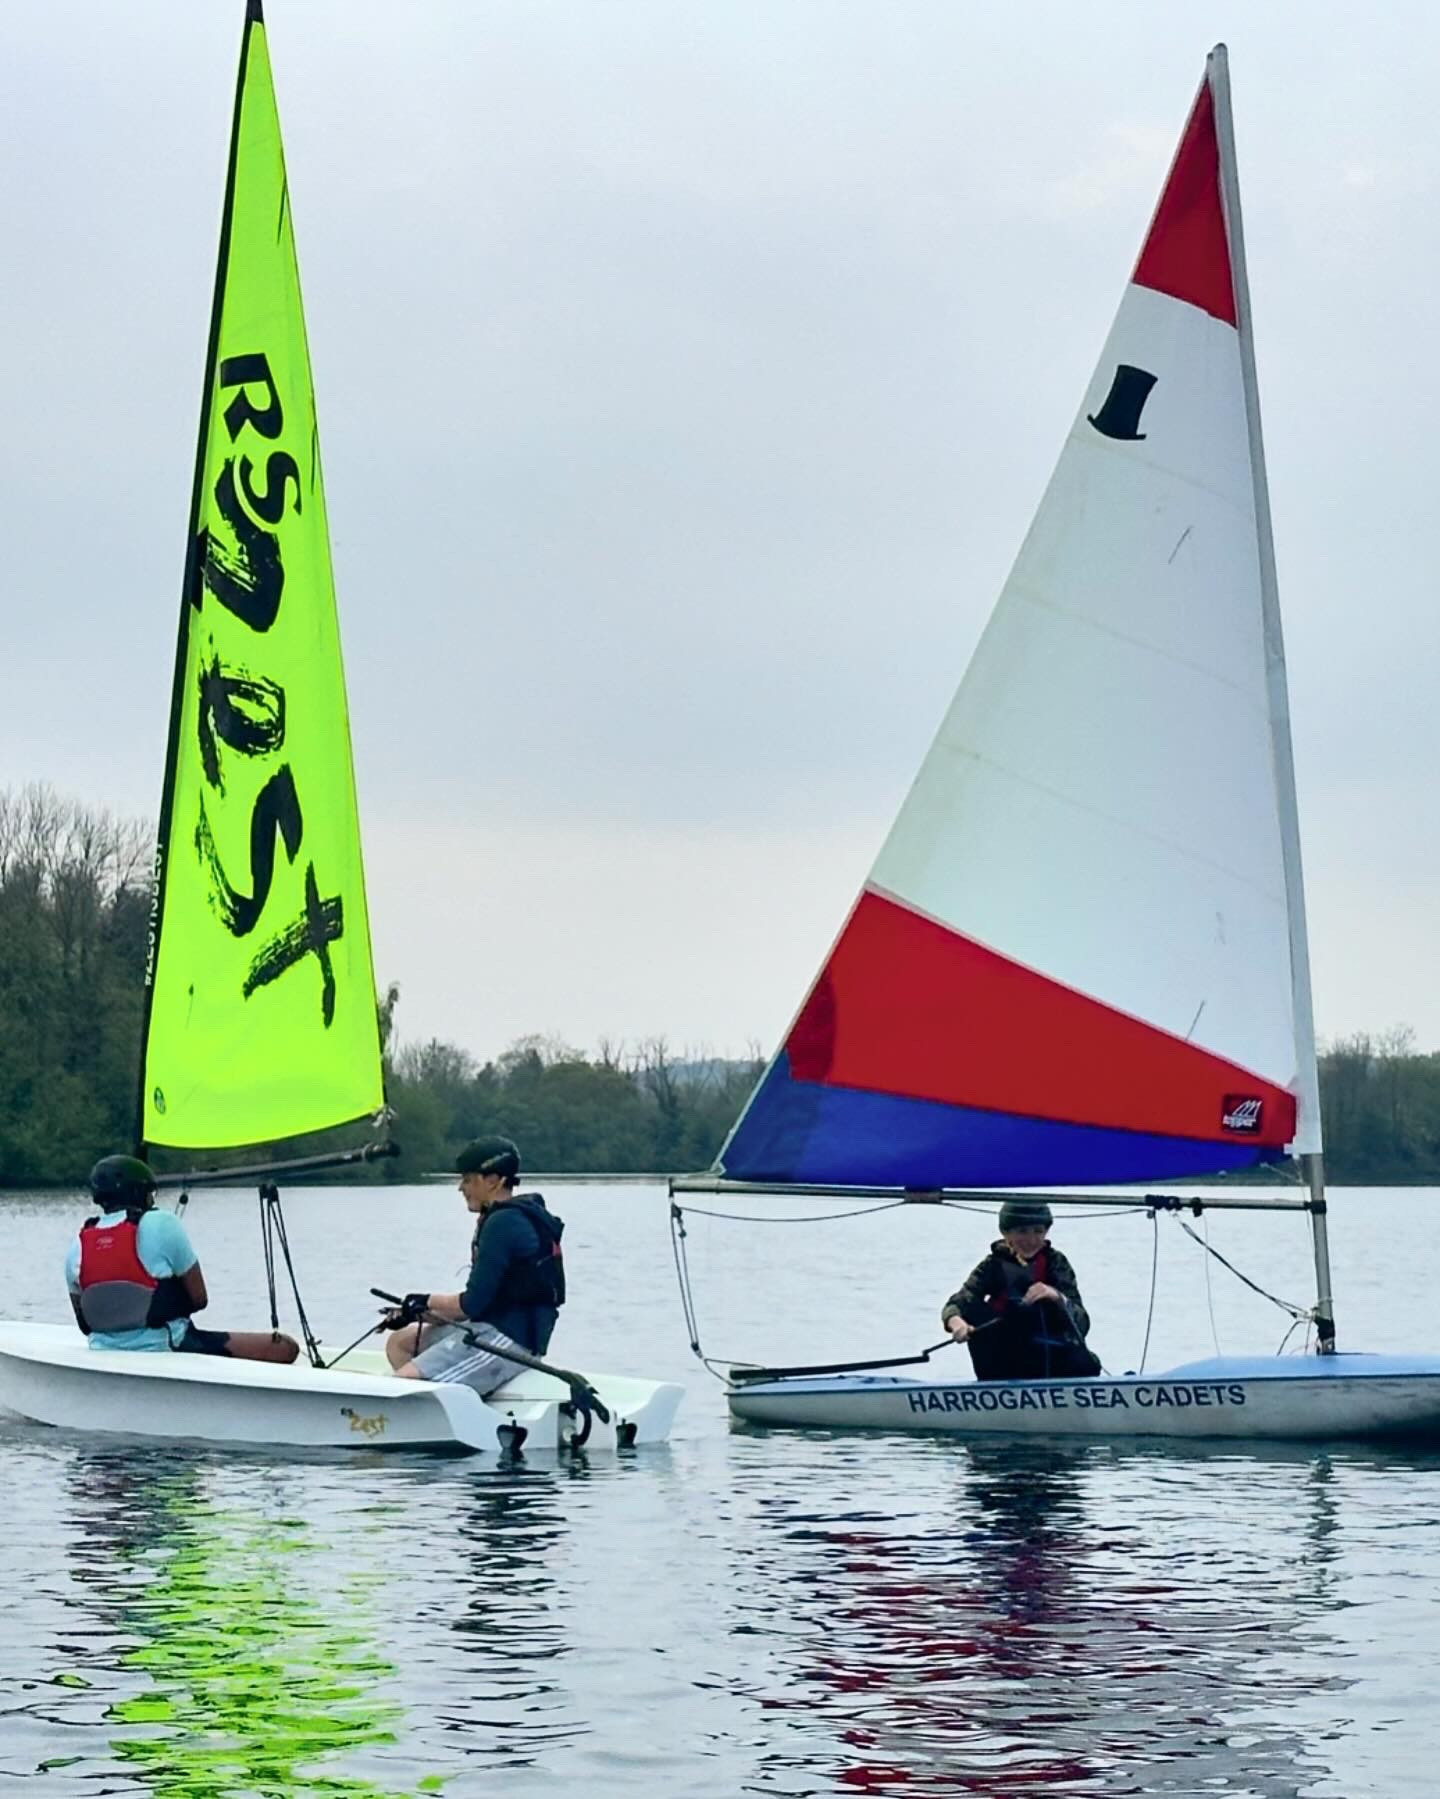 Cadets sailing on the lake